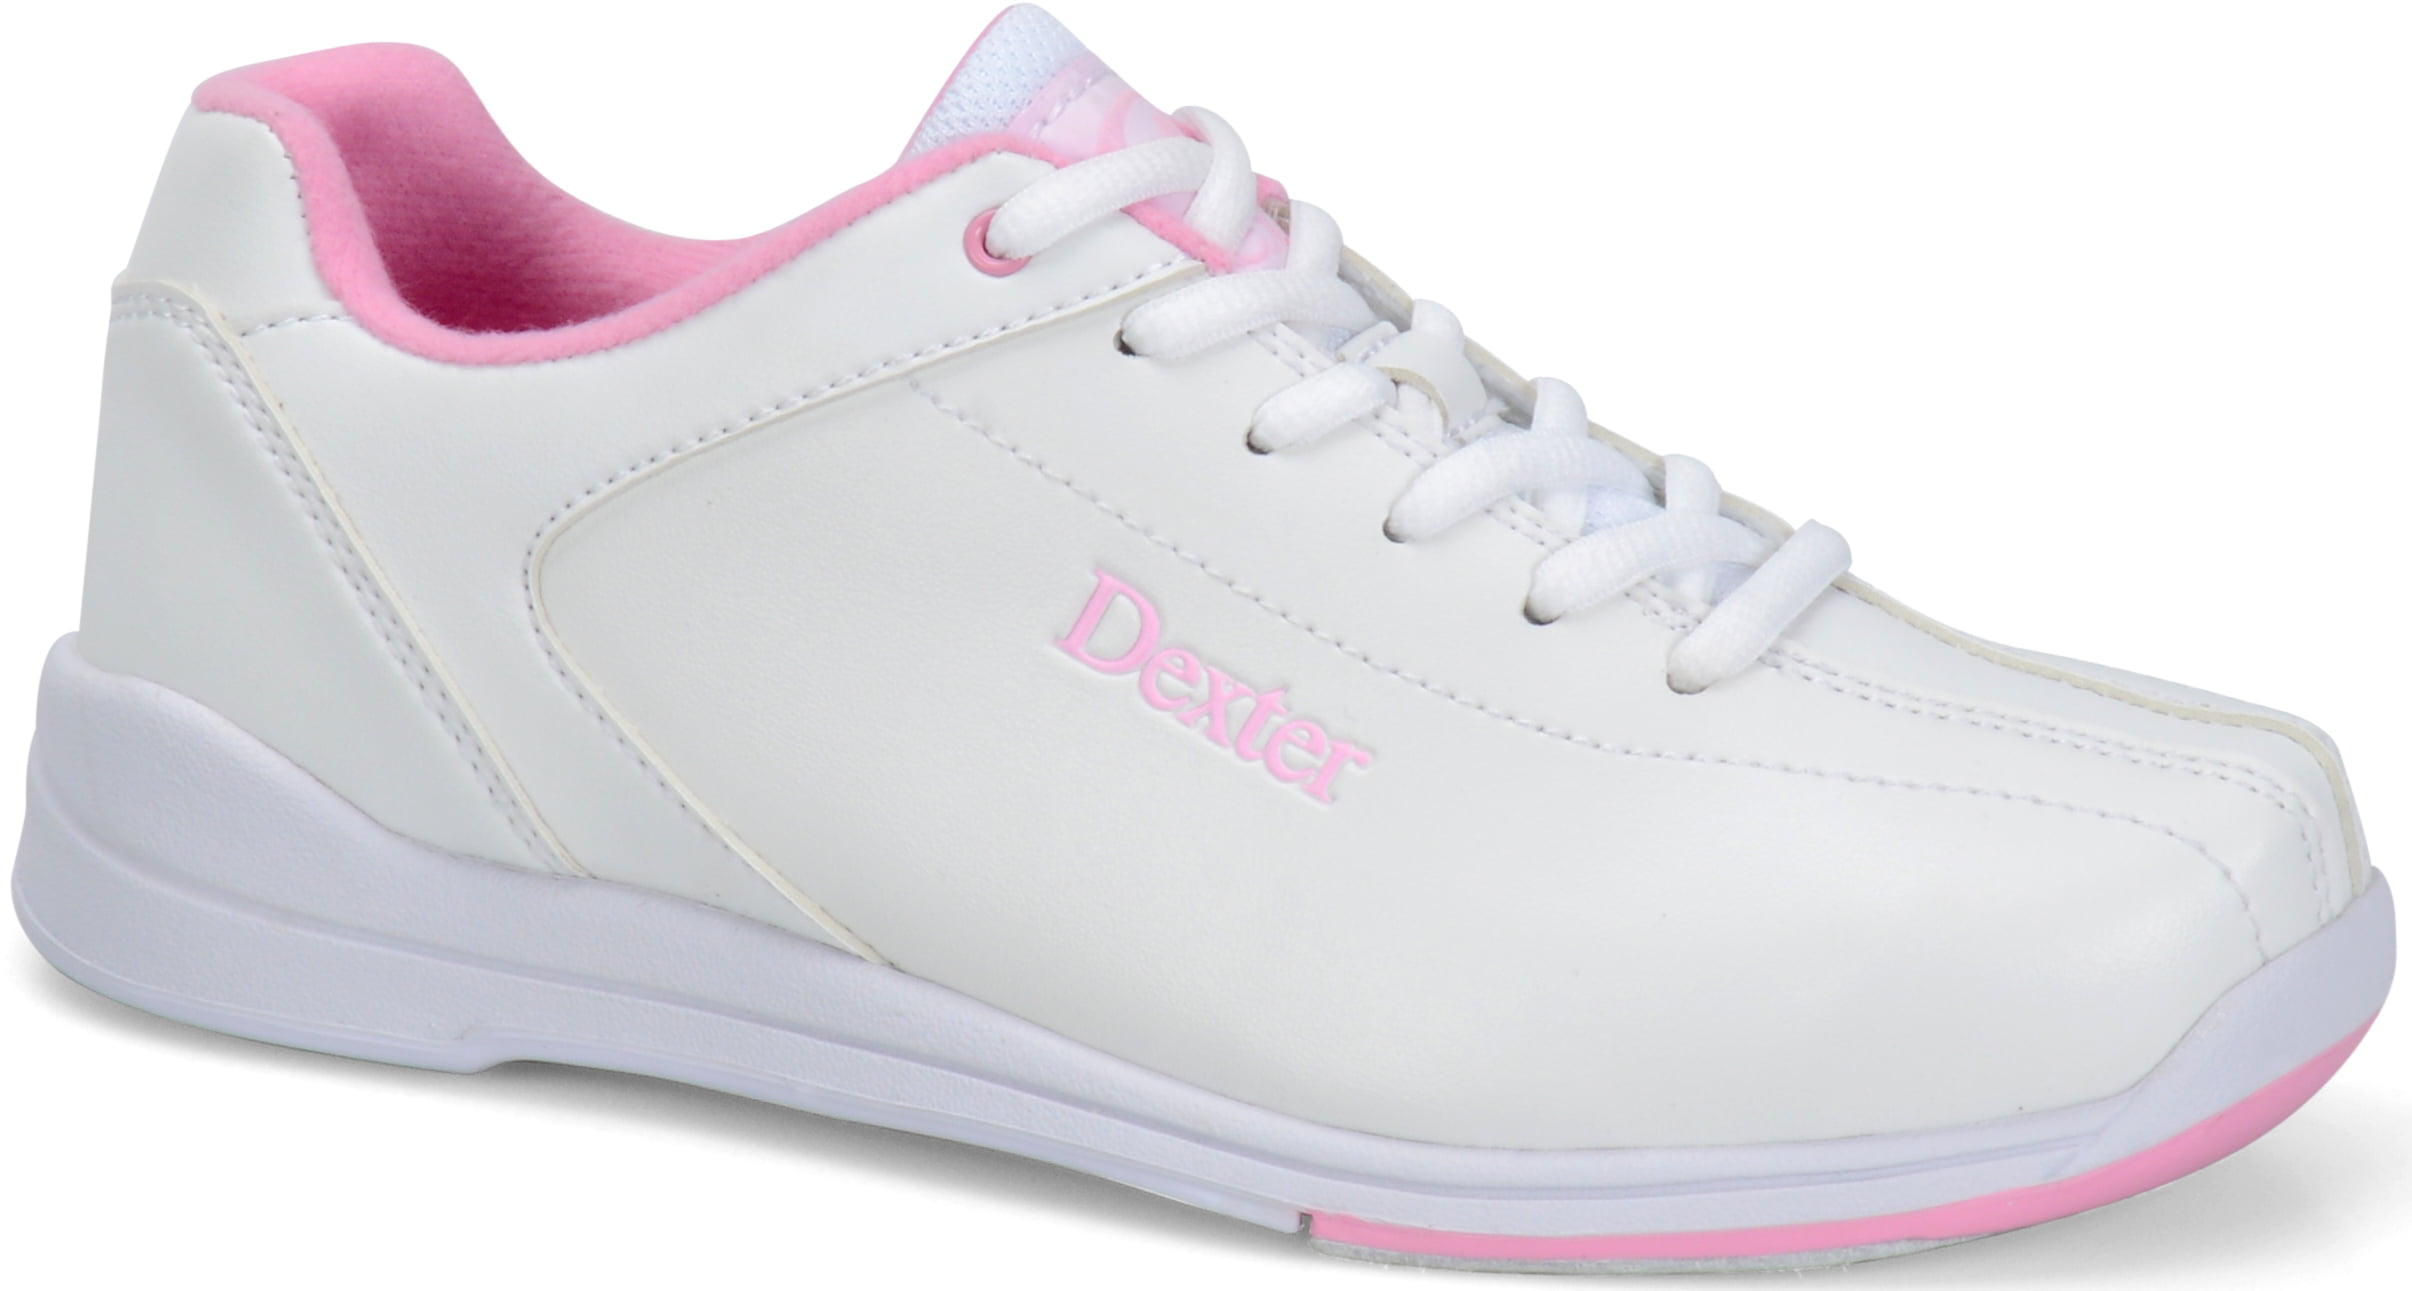 Dexter Raquel 3 III White Pink Bowling Shoes Womens Size 7 M for sale online 